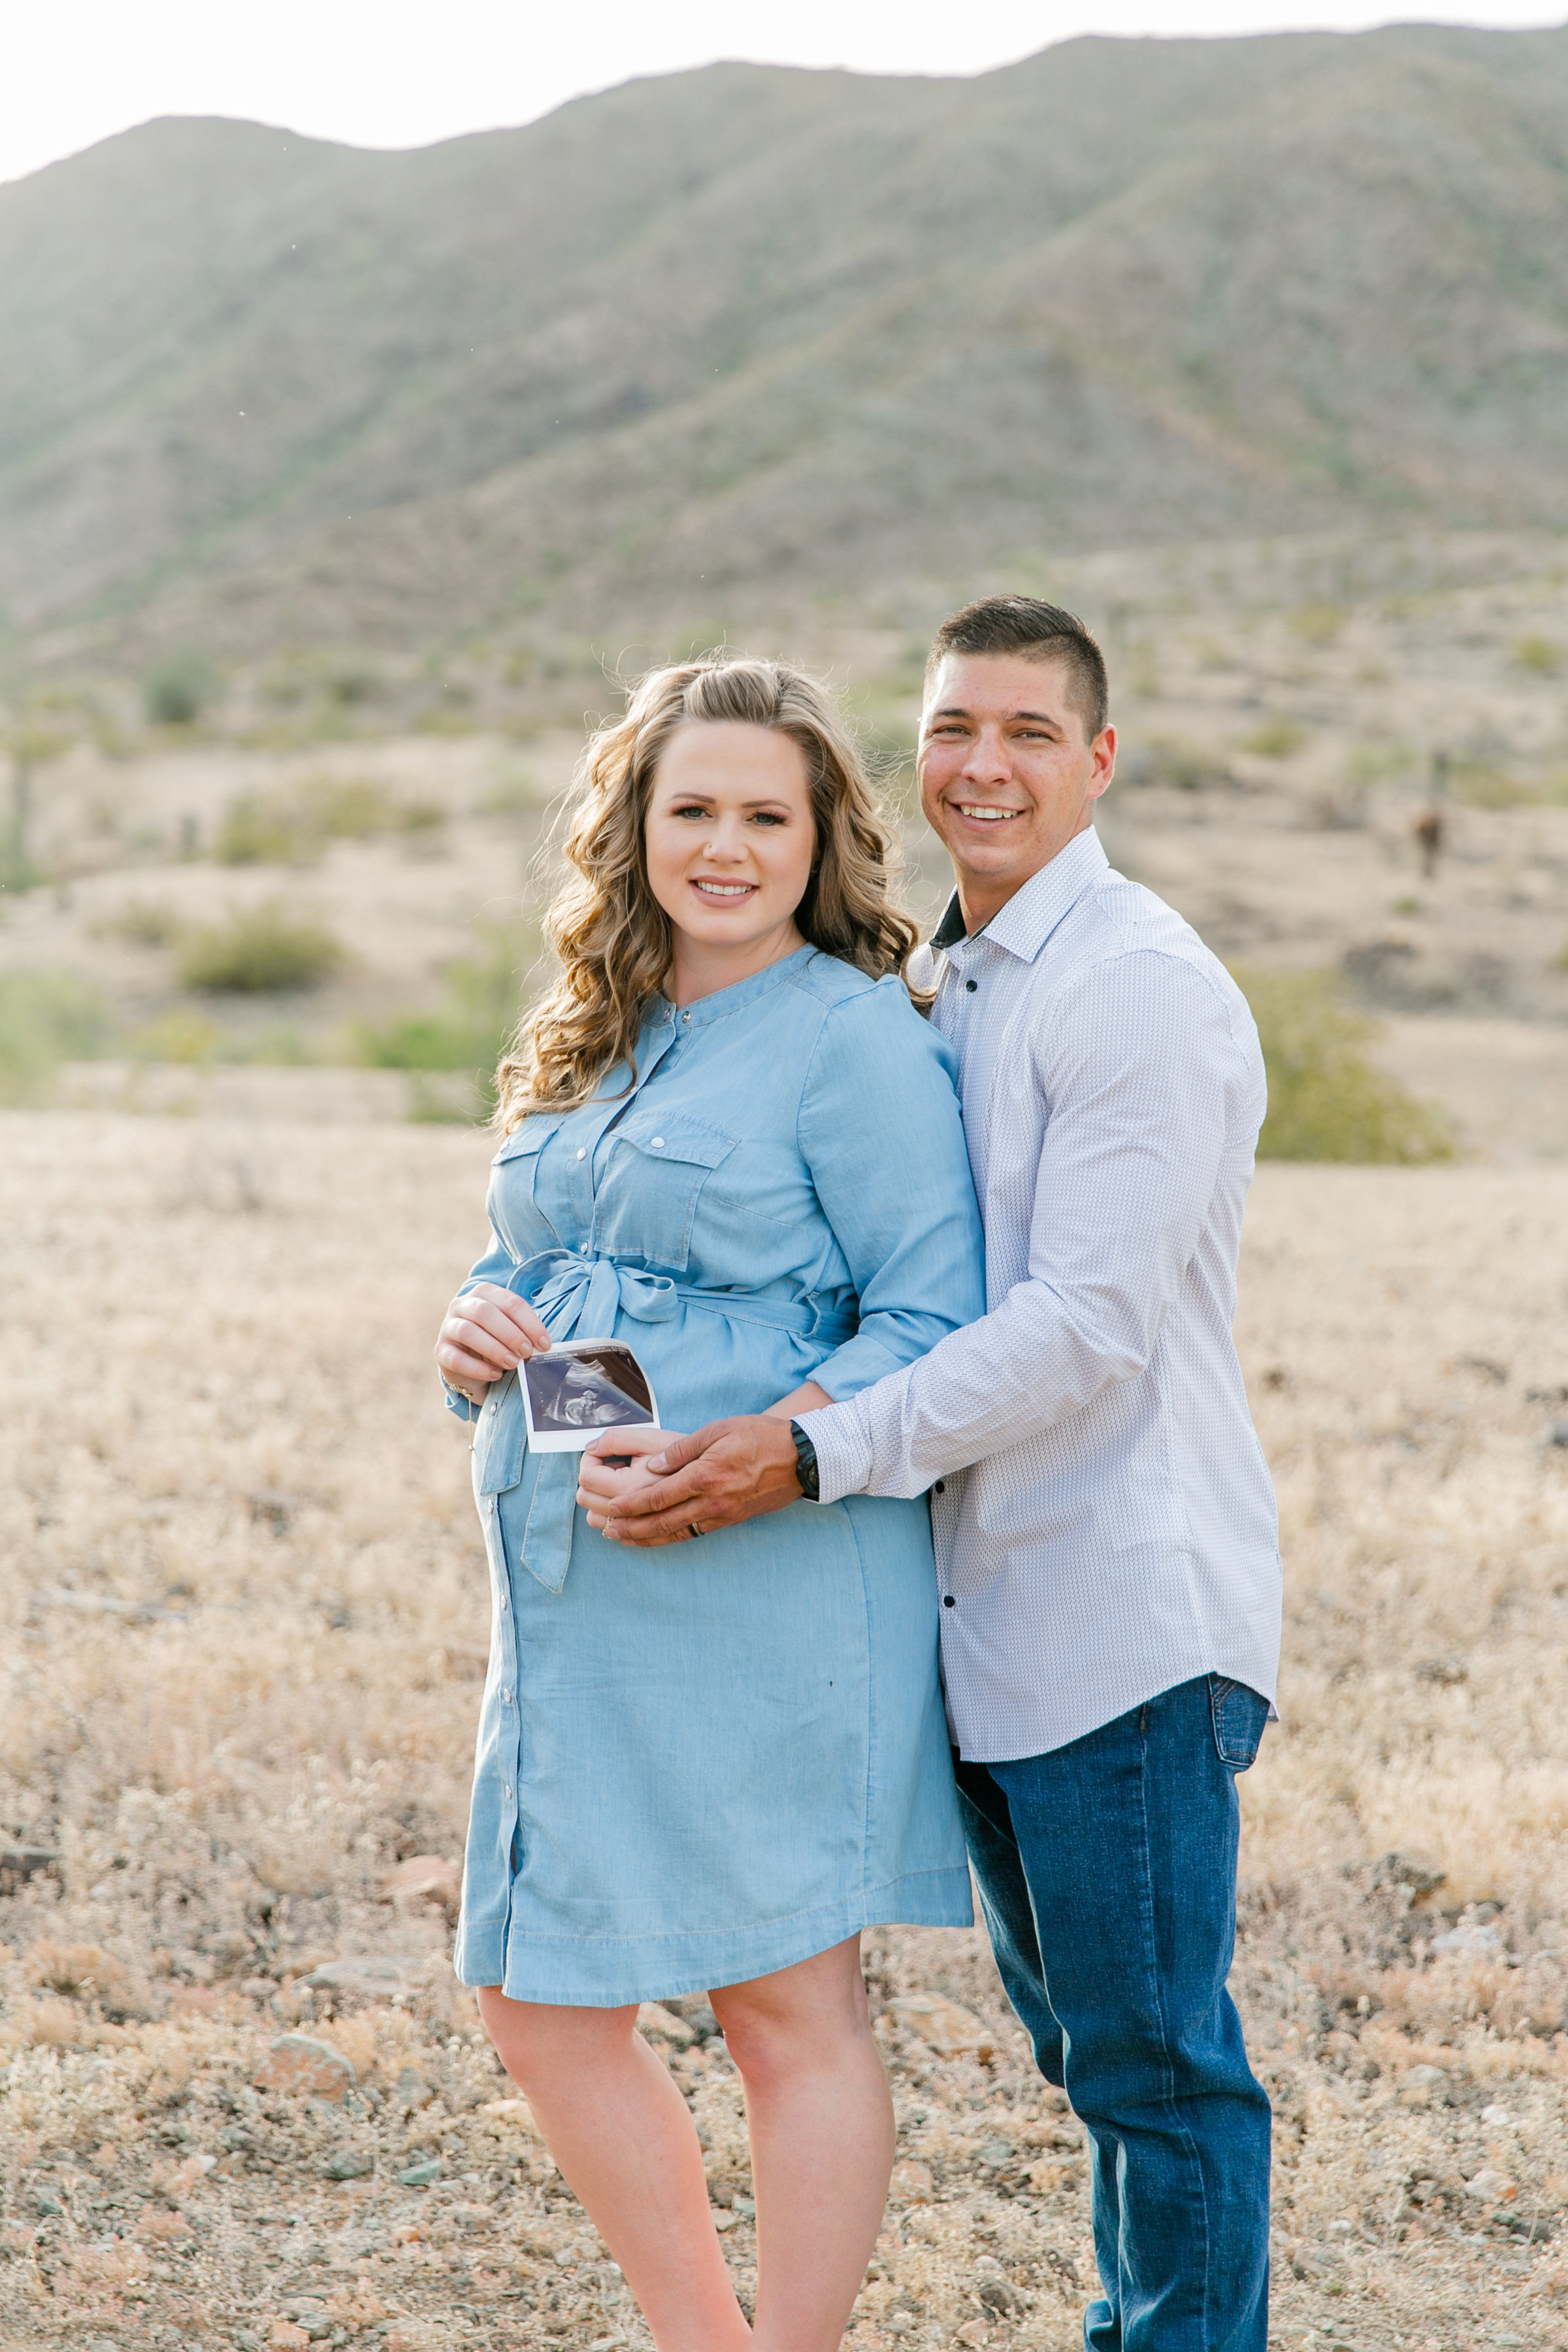 Karlie Colleen Photography - Arizona Maternity Photography - Brittany & Kyle-114